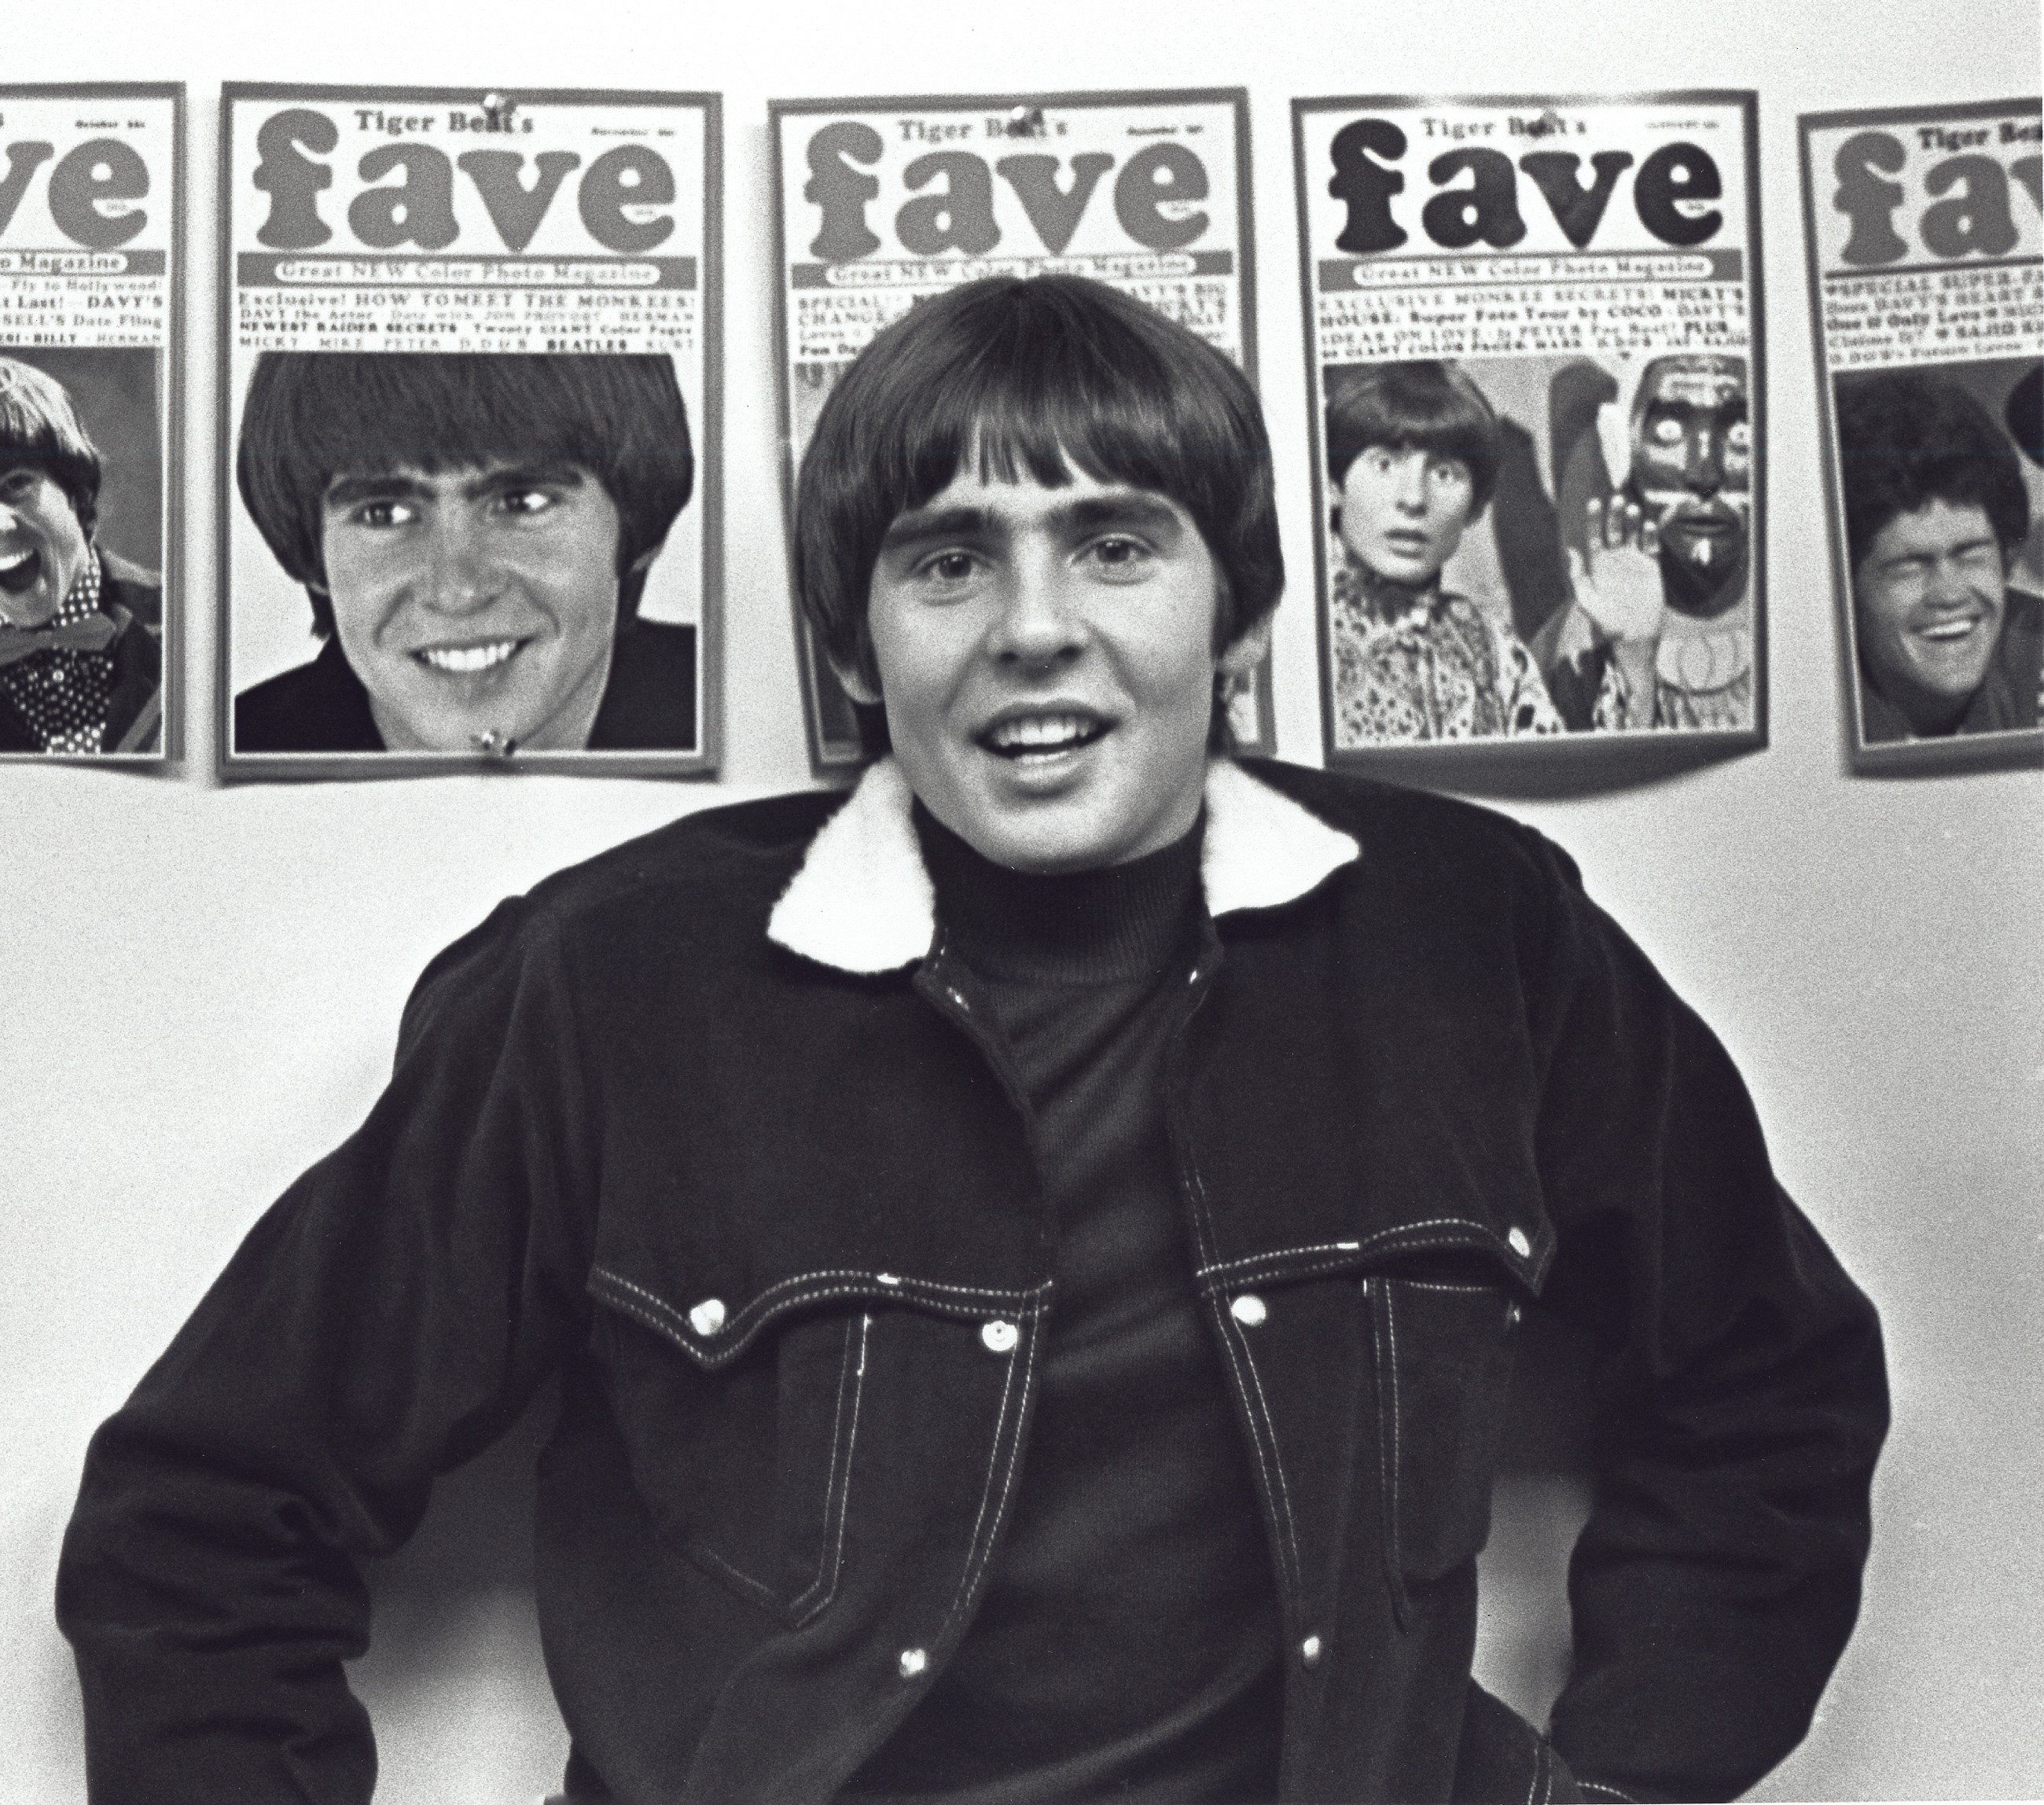 Davy Jones with posters during The Monkees' "Last Train to Clarksville" era